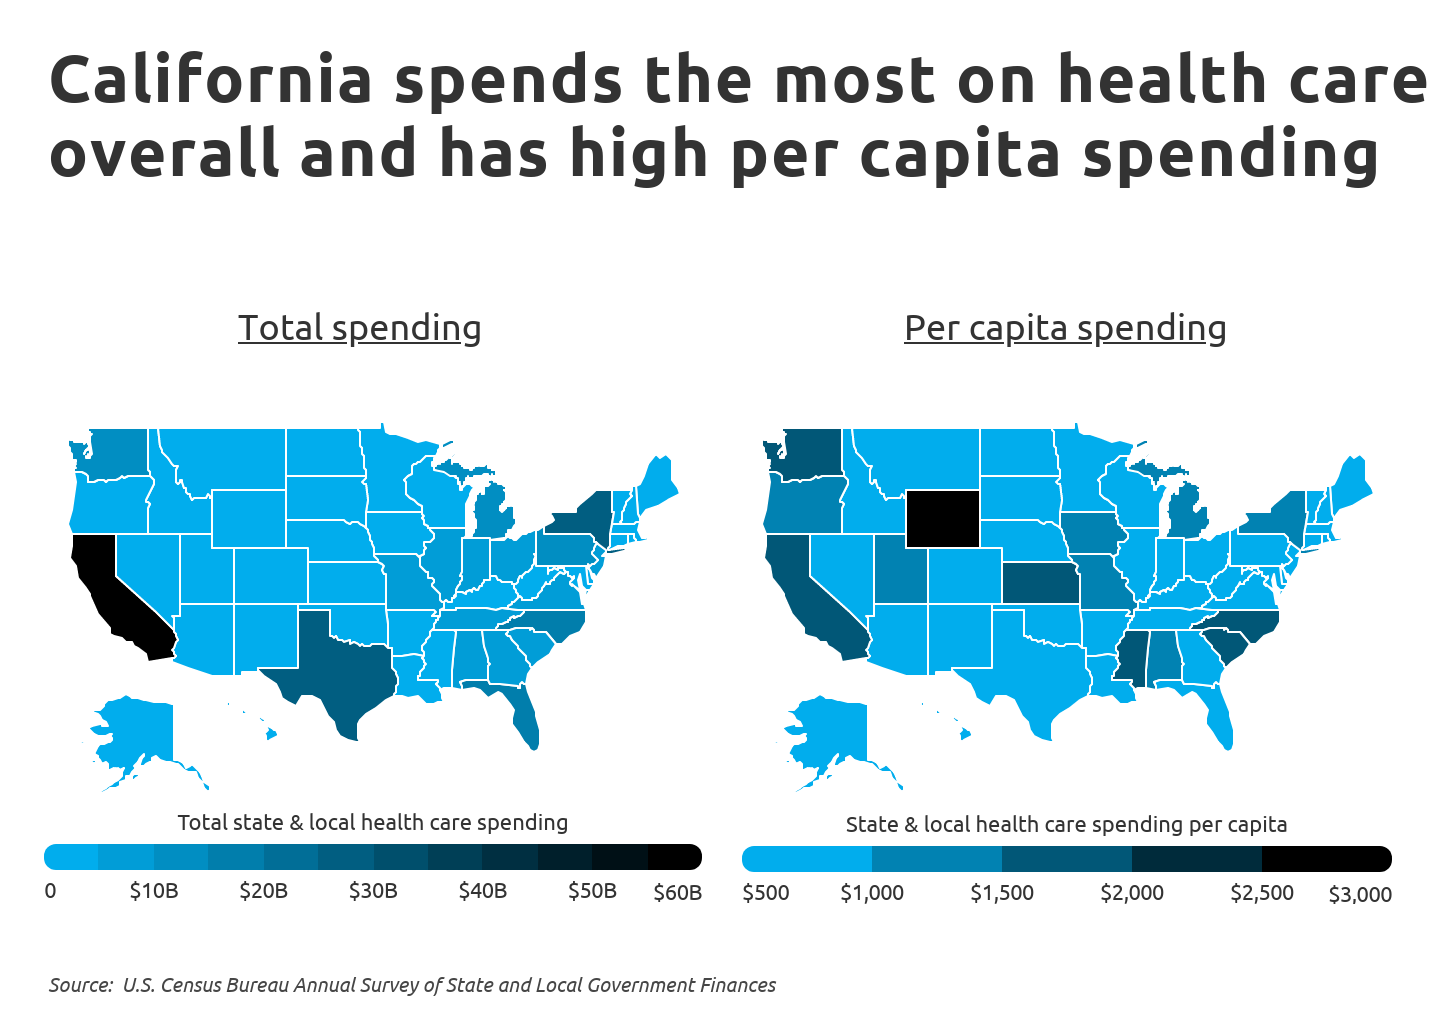 California spends the most on health care overall and has high per capita spending